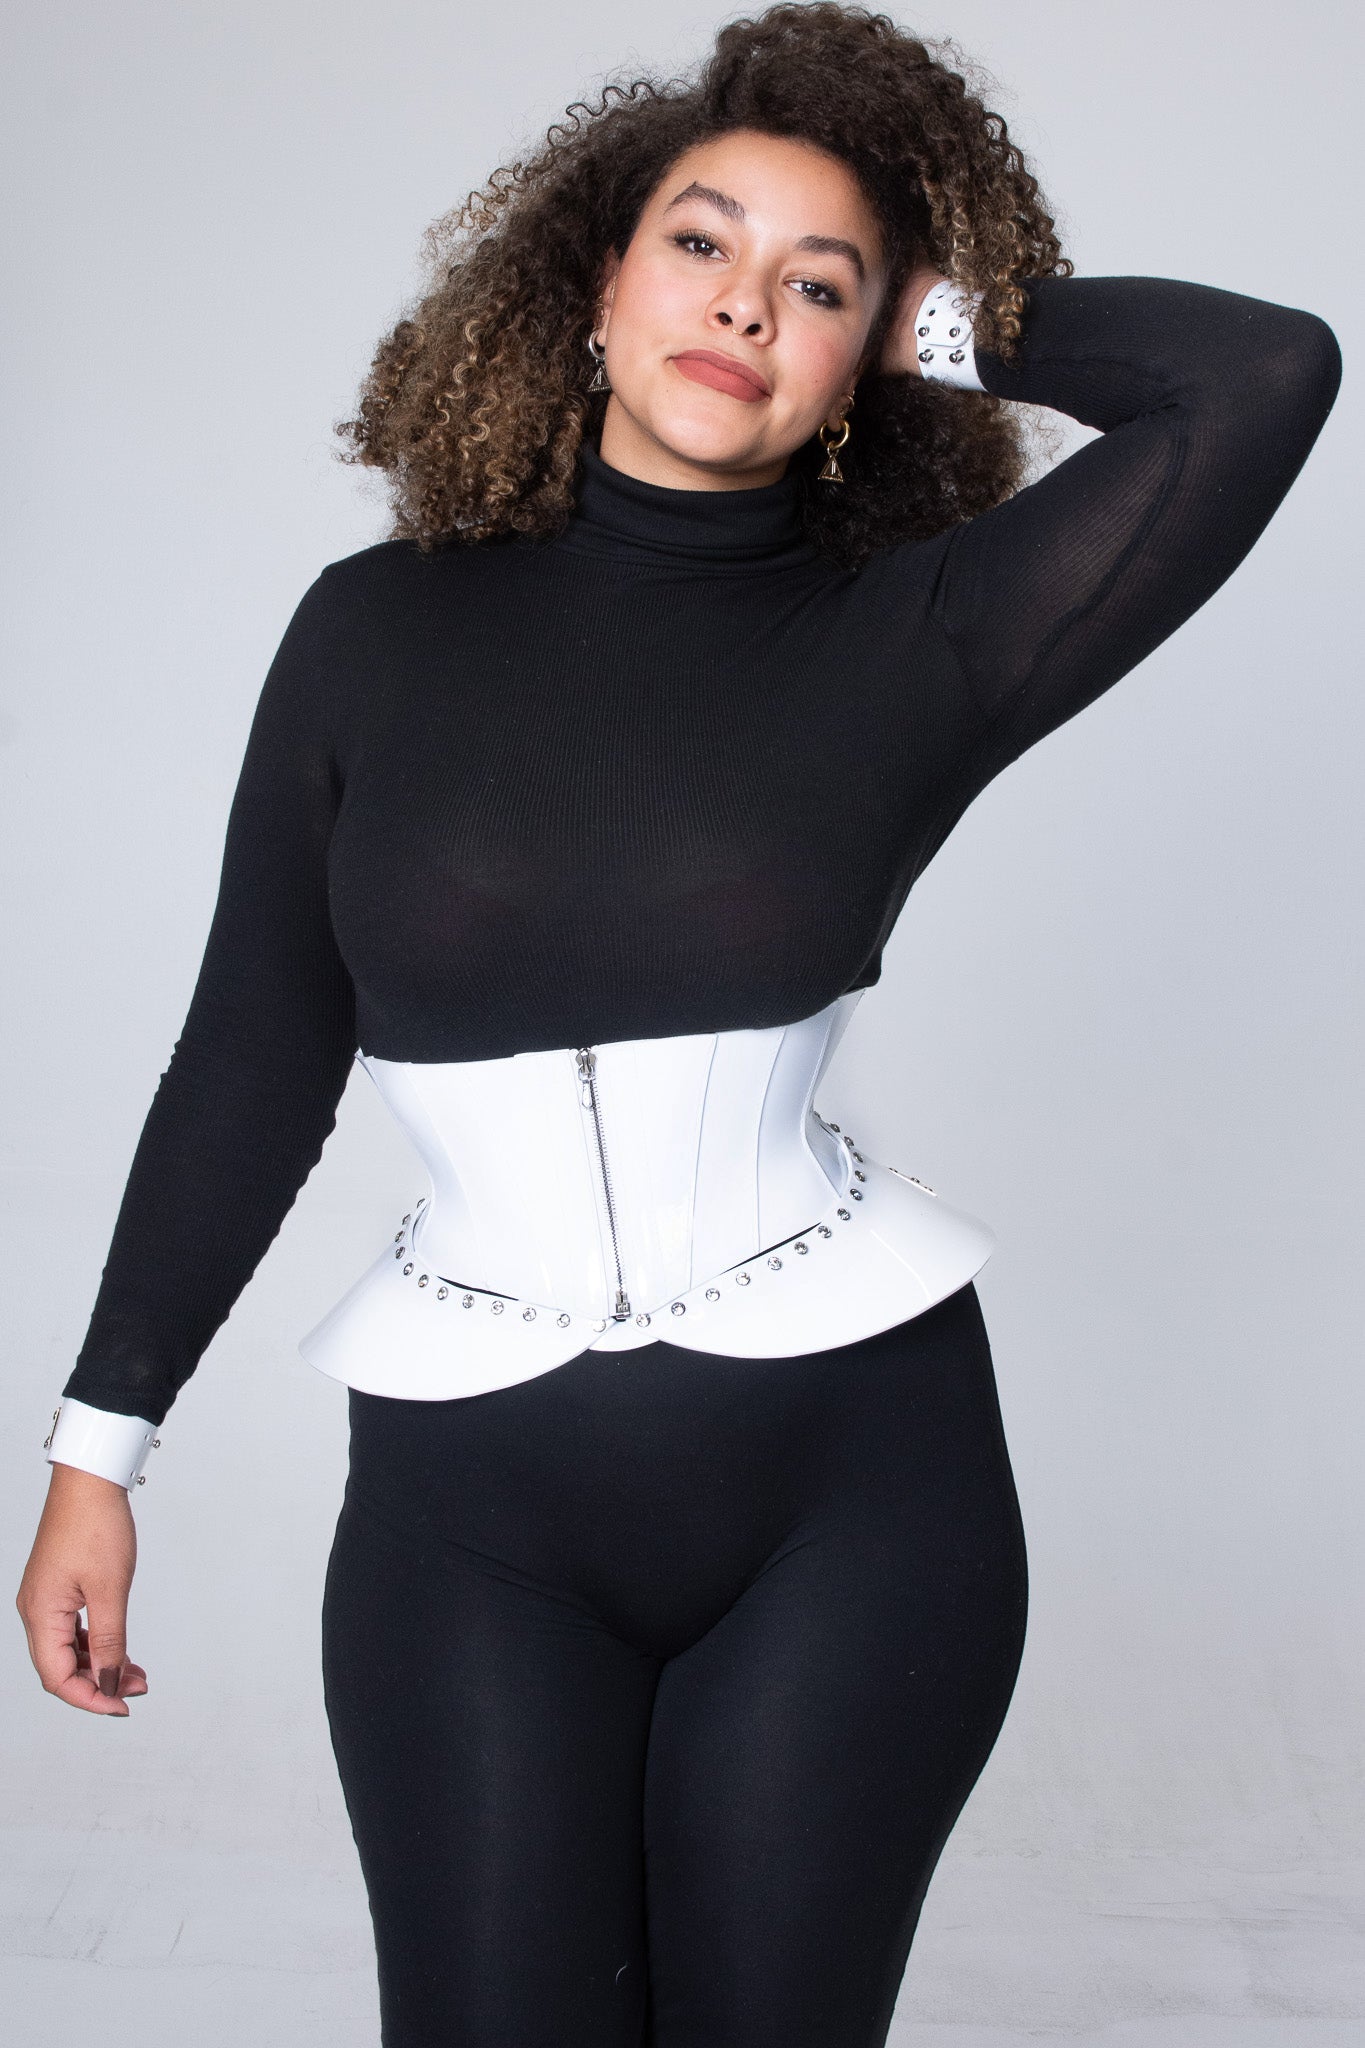 Violetta corset belt in shiny white: A versatile accessory for enhancing your silhouette